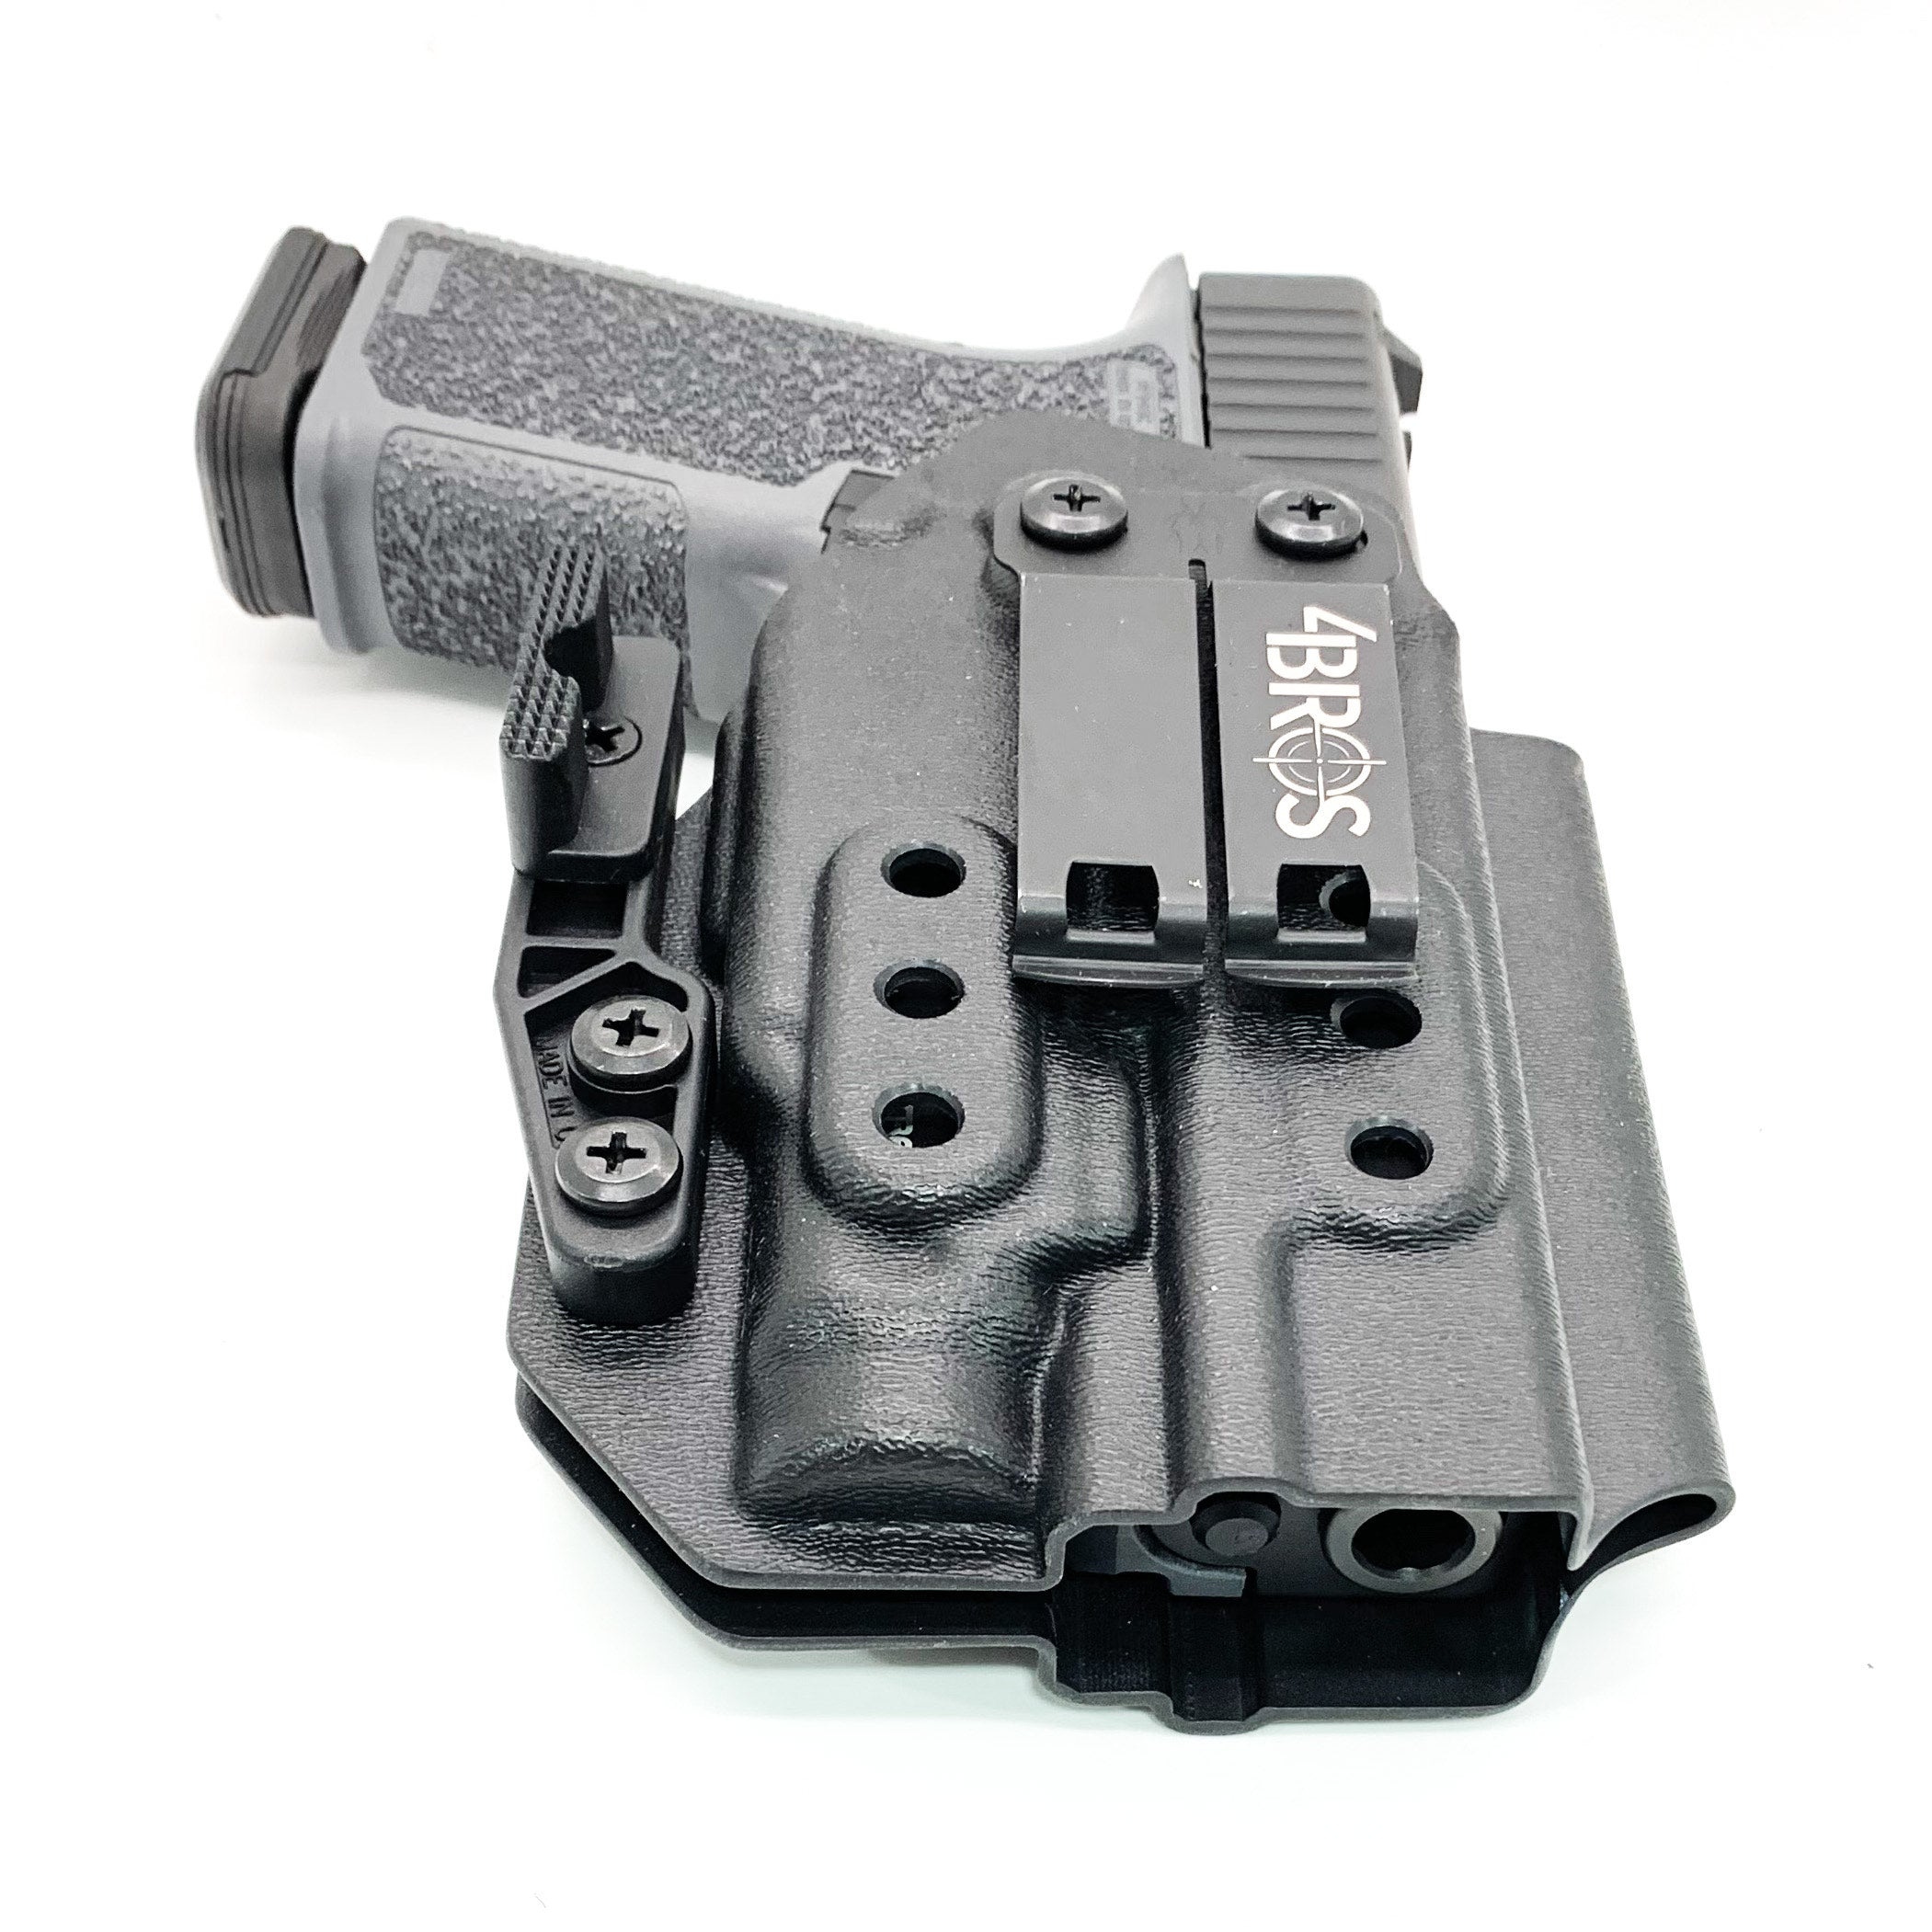 Inside Waistband Holster designed to fit the Polymer80 PF940C pistol with the Streamlight TLR-7 Sub weapon mounted light.  Holster will fit the Glock 19 size slide length pistol. Open Muzzle for threaded barrel, full sweat guard, adjustable retention, minimal material, reduced printing. Made in the USA